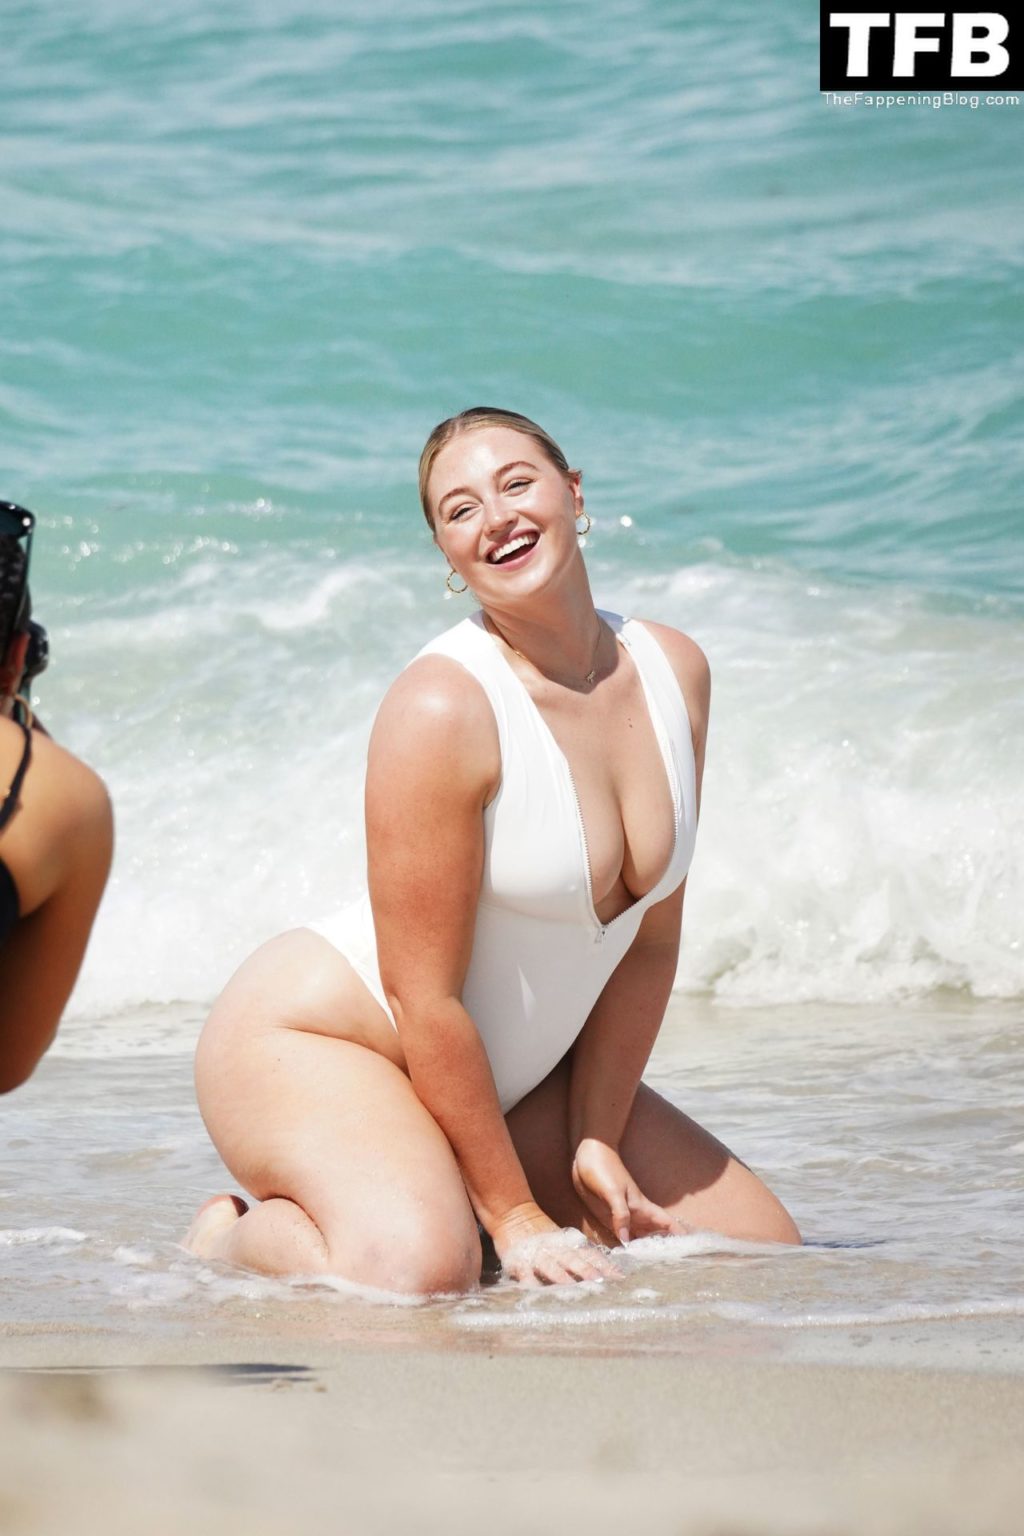 Iskra Lawrence Sexy The Fappening Blog 18 1024x1536 - Iskra Lawrence Displays Her Curves on the Beach in Miami (21 Photos)